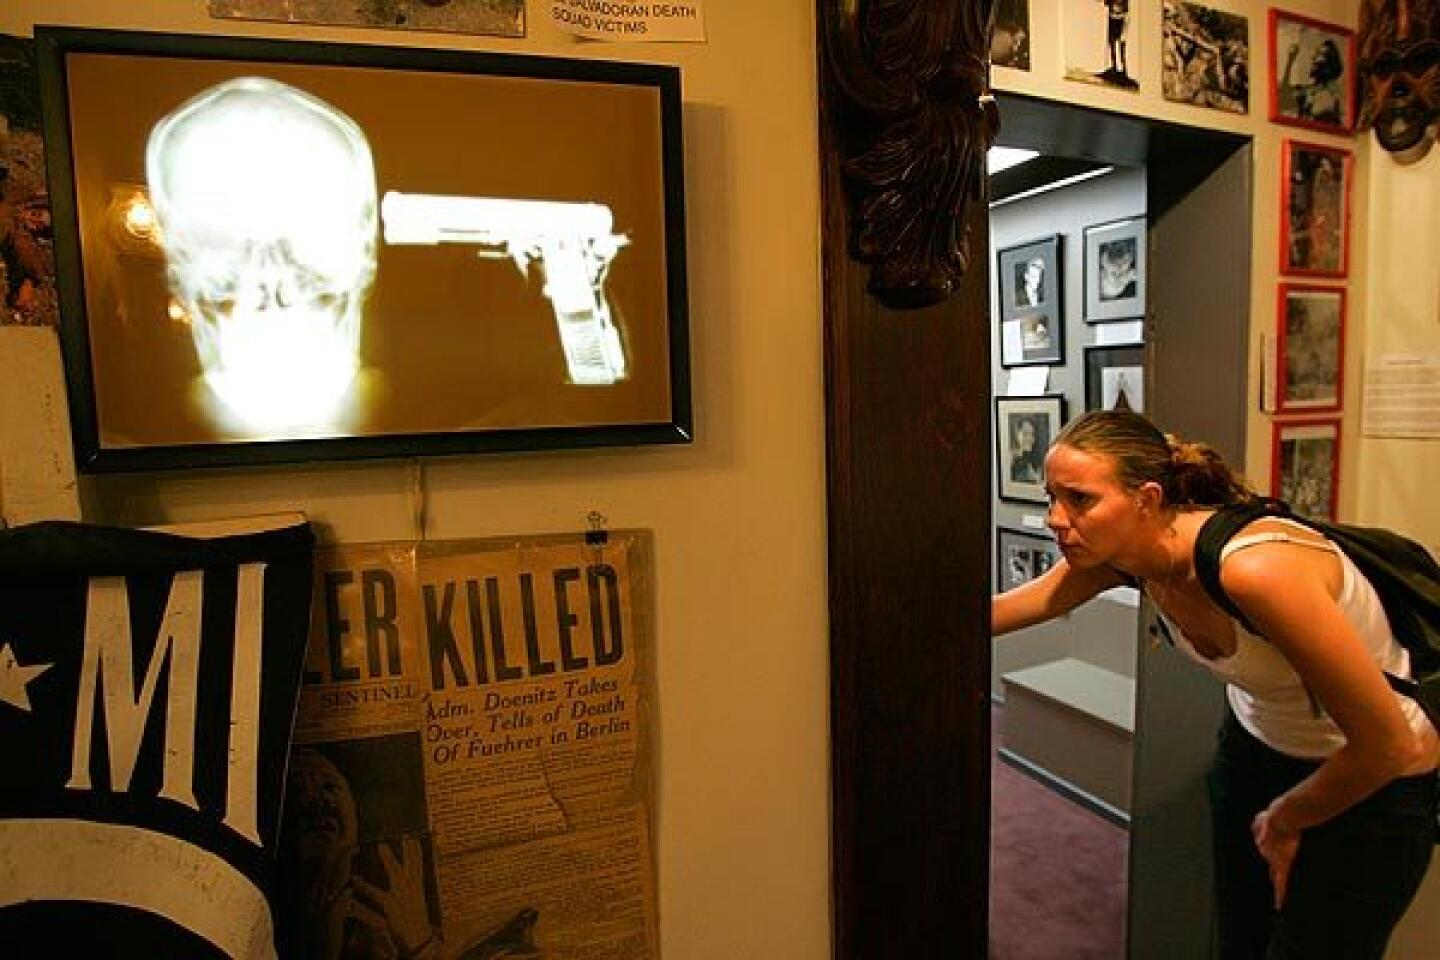 Video: Business is always dead at this grisly Hollywood museum - Los Angeles Times